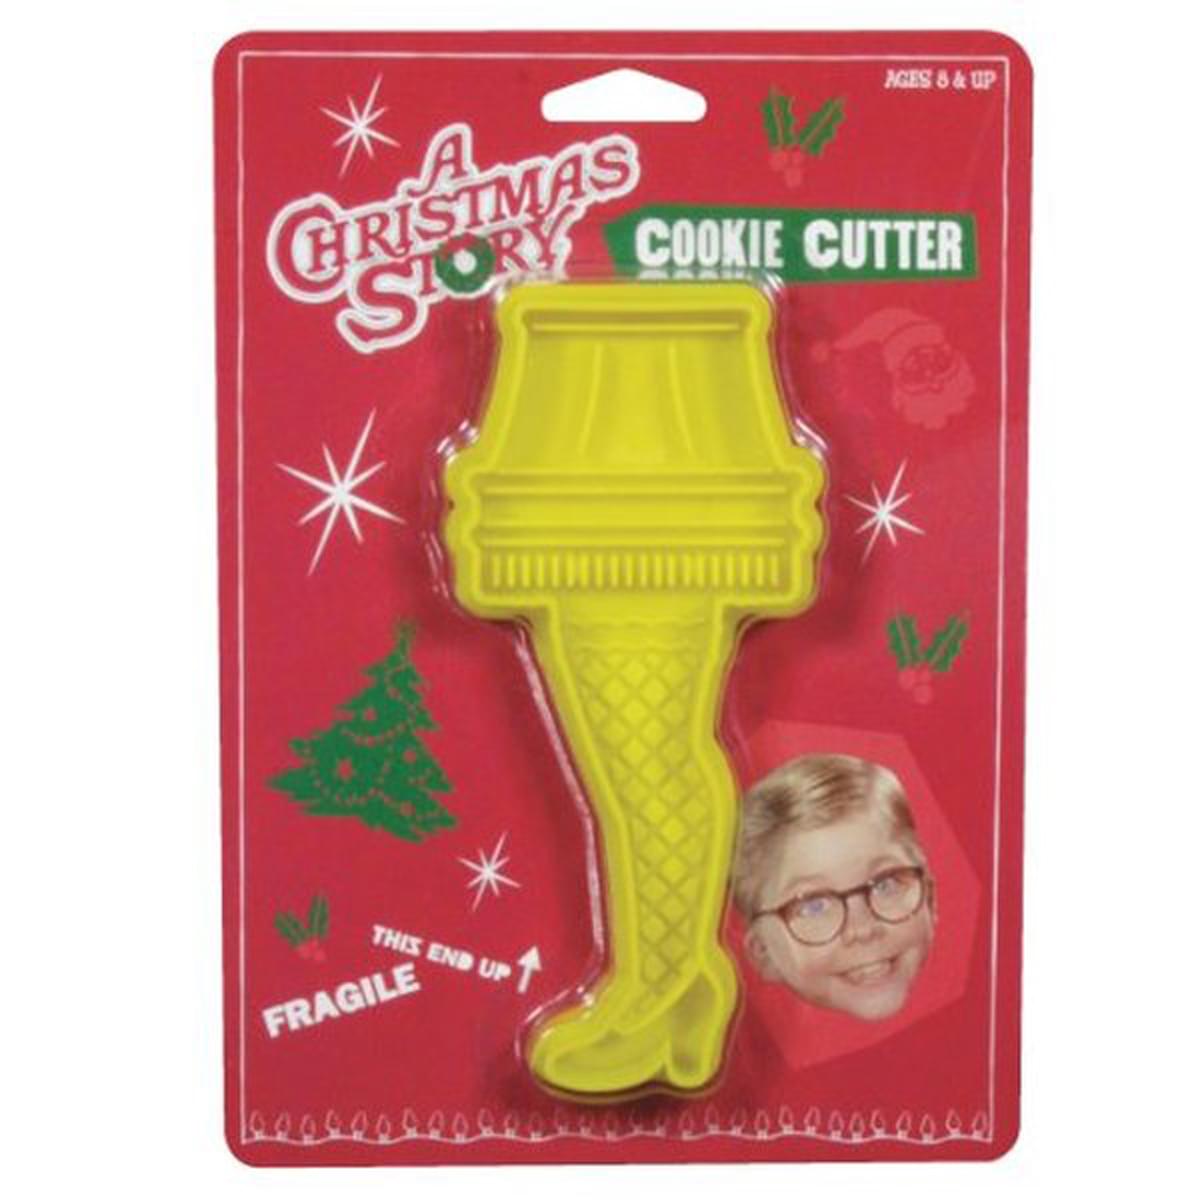 A Christmas Story Cookie Cutter